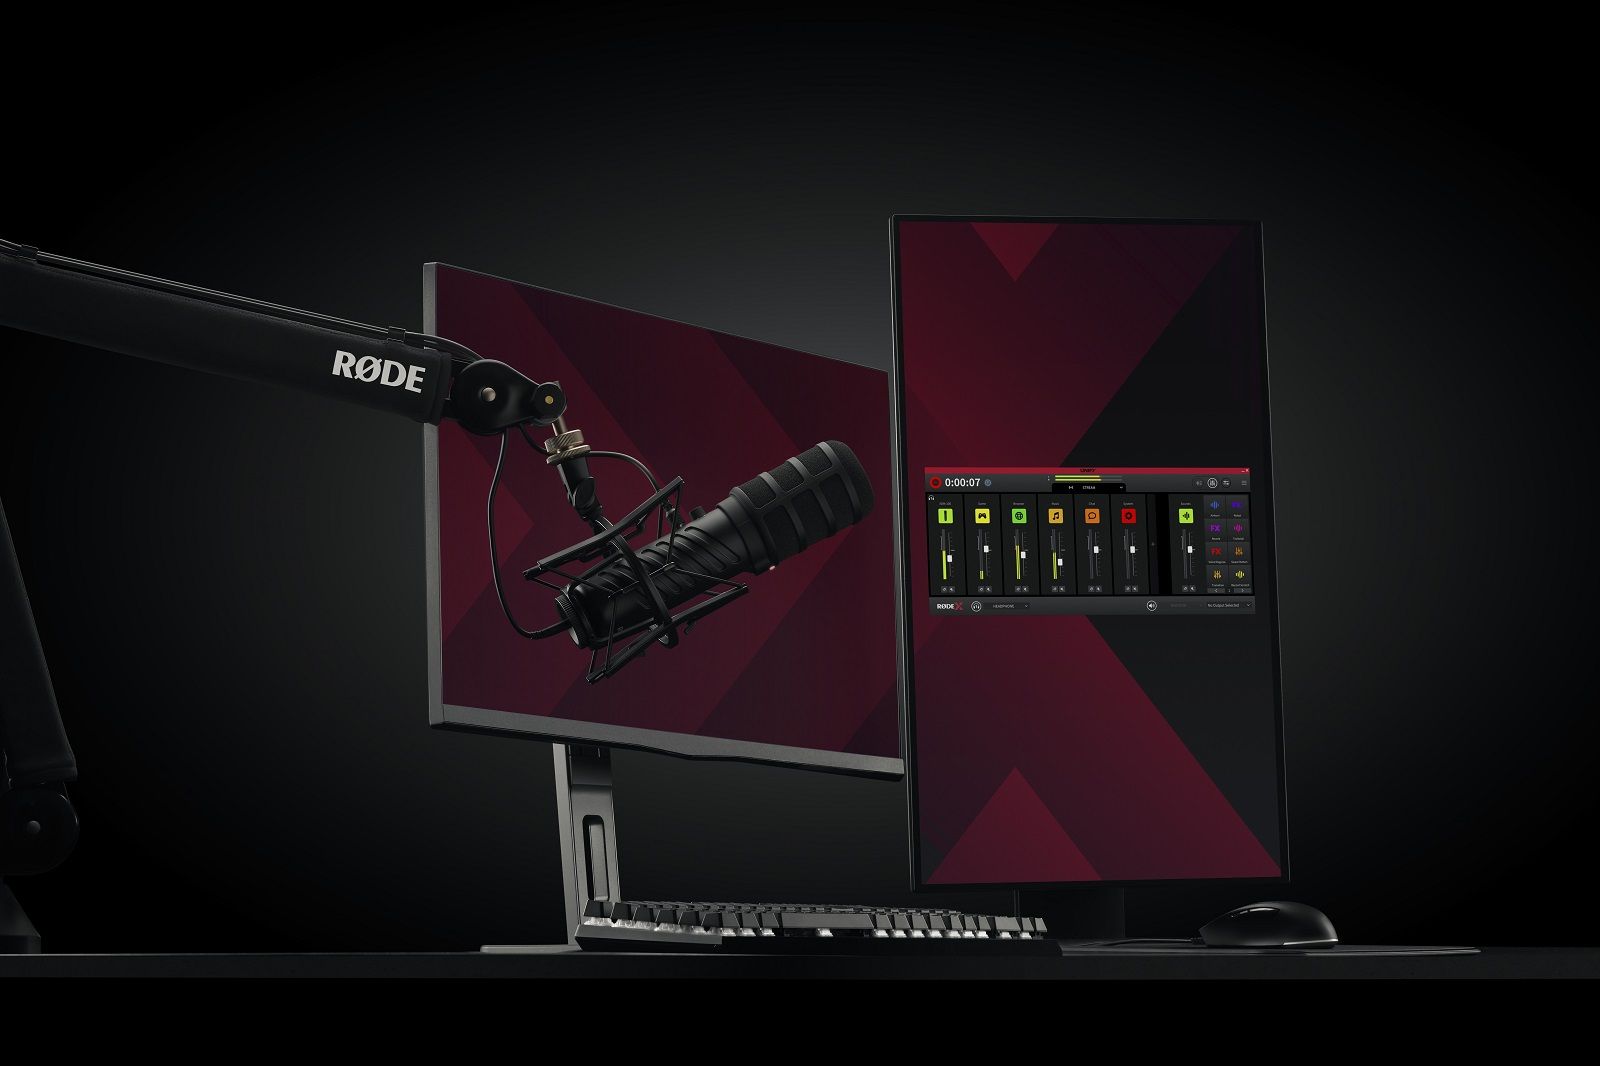 Rode has launched a new gaming division along with two new mics and streaming software photo 2